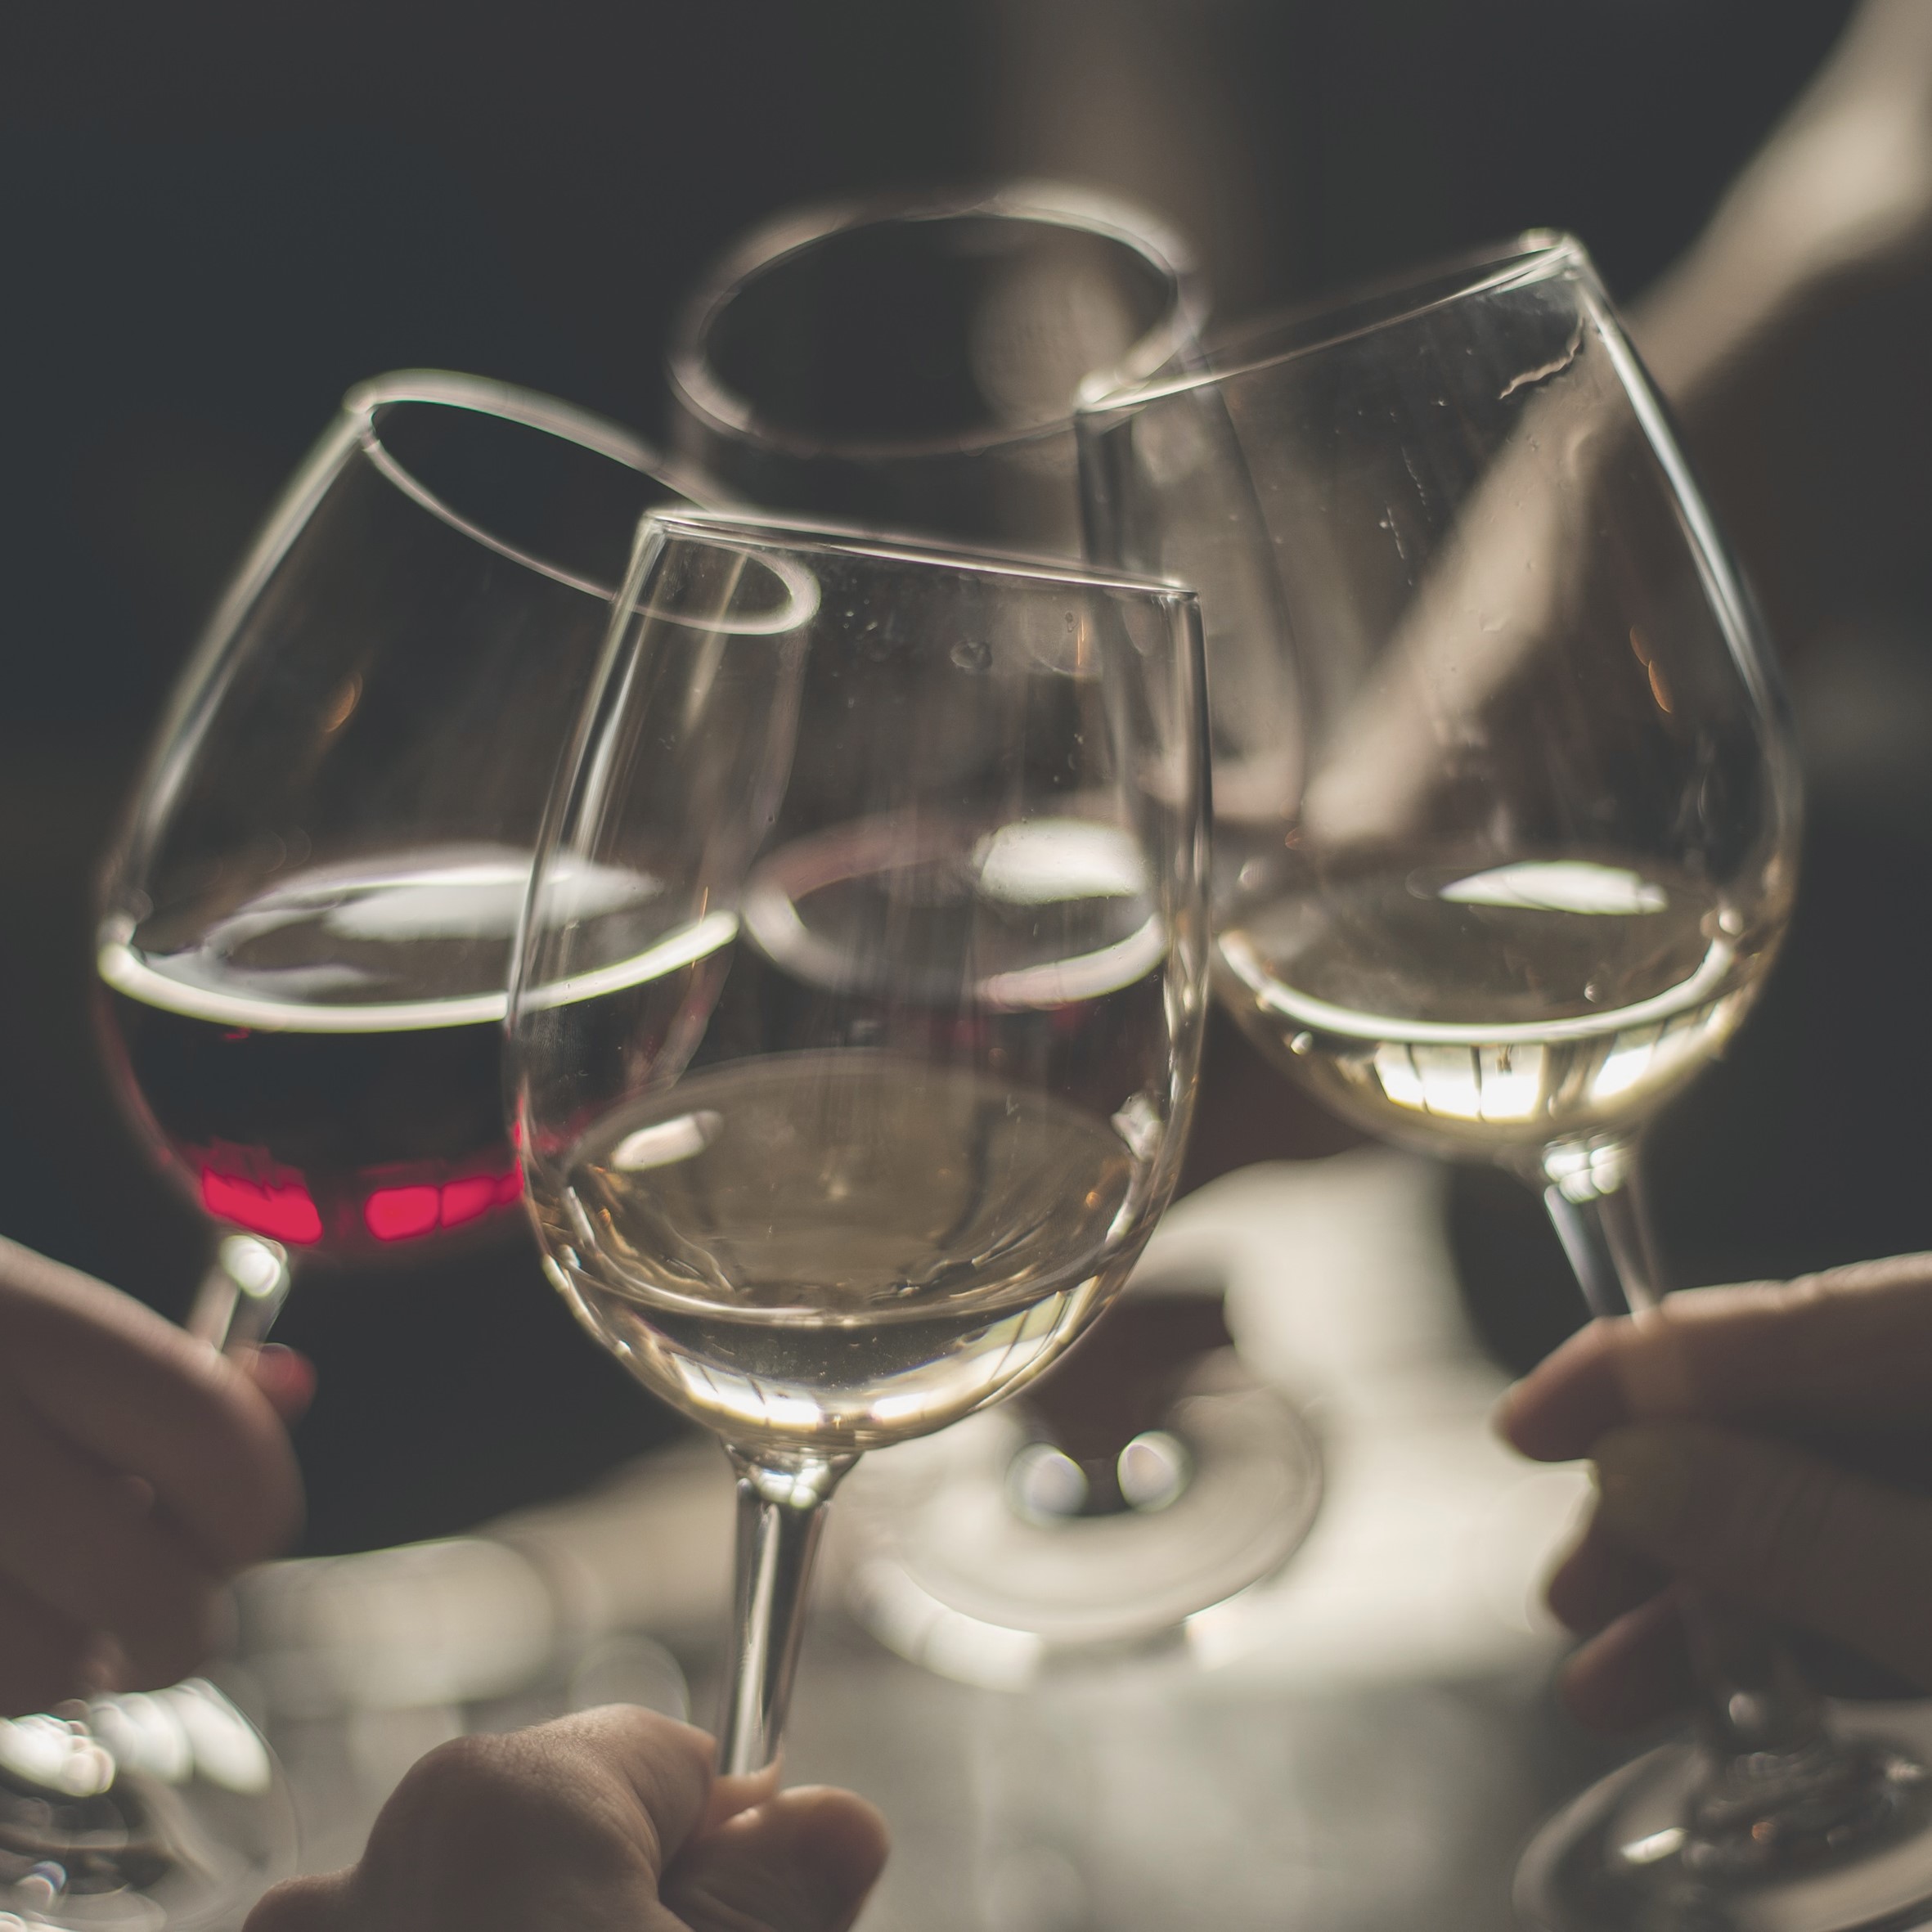 UK On trade - UK wine drinkers become less influenced by wine descriptors